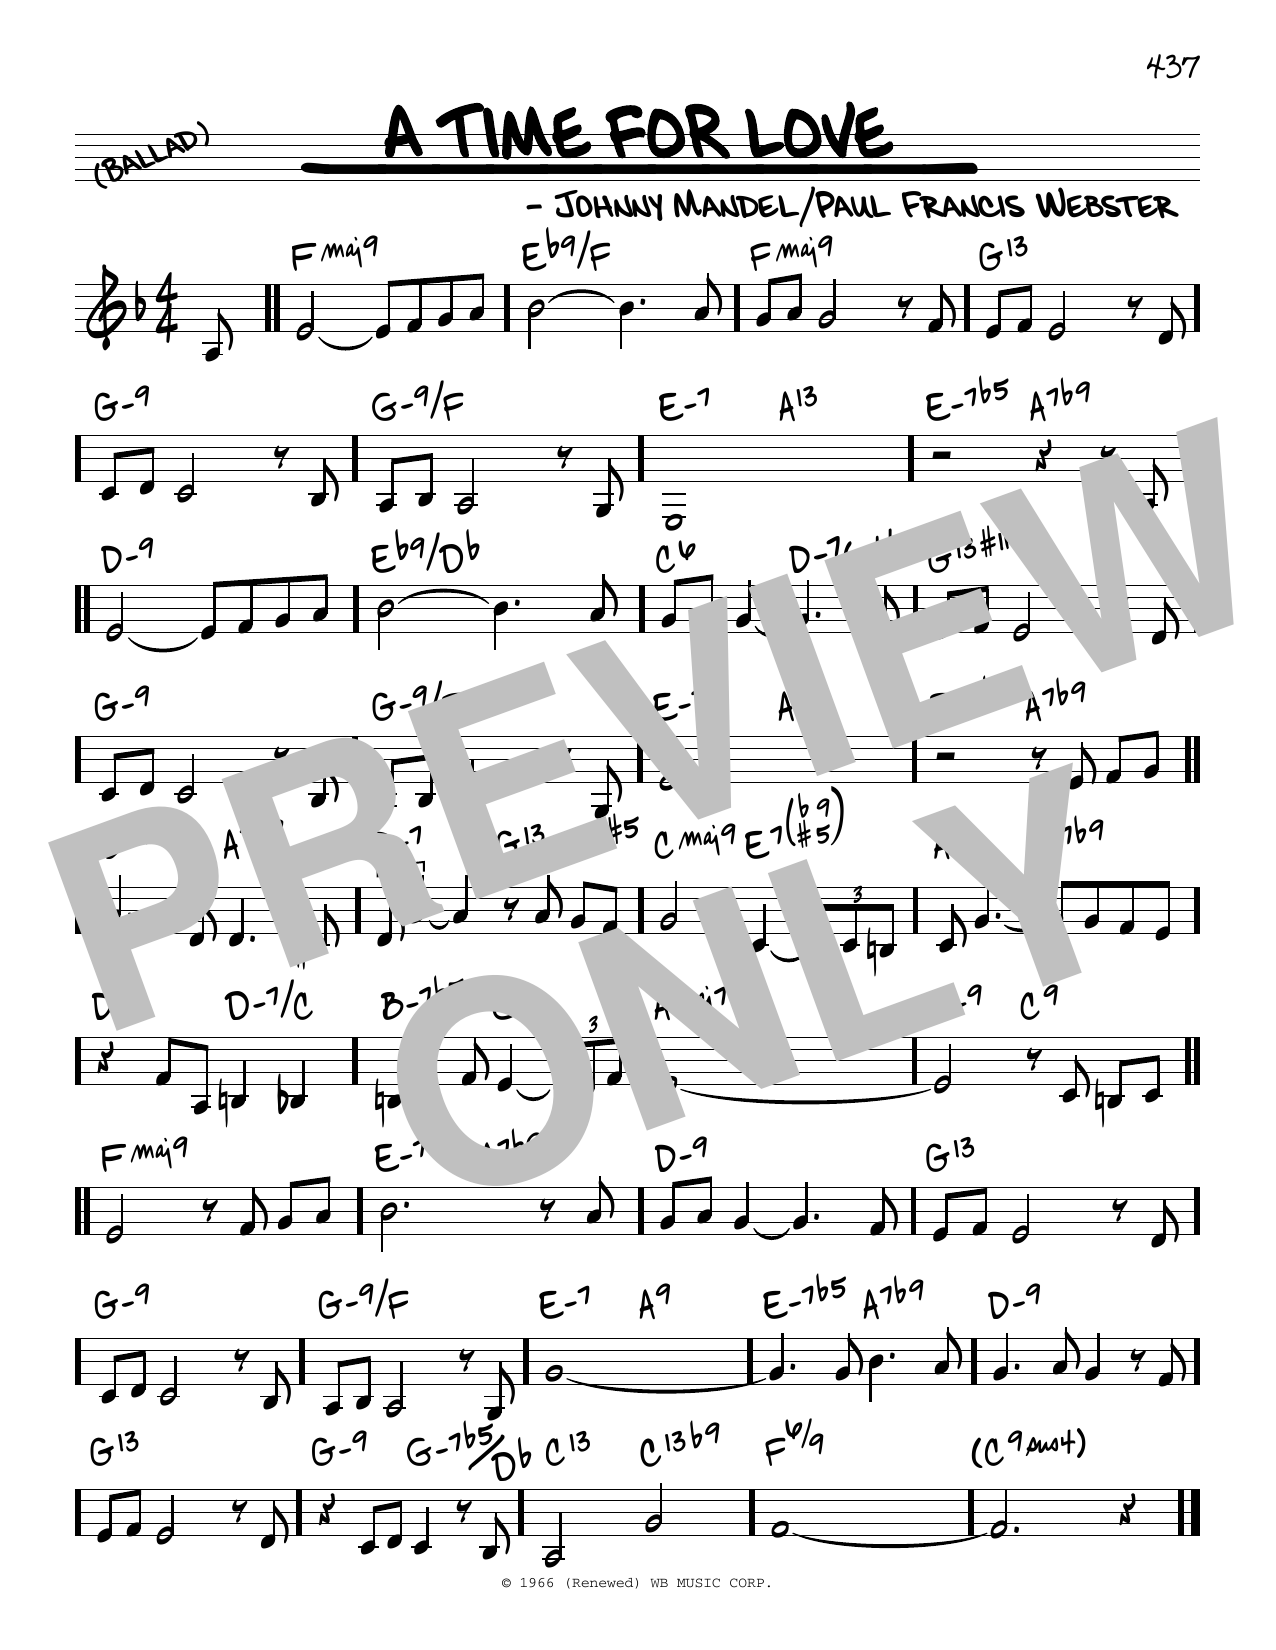 Download Johnny Mandel and Paul Francis Webst A Time For Love Sheet Music